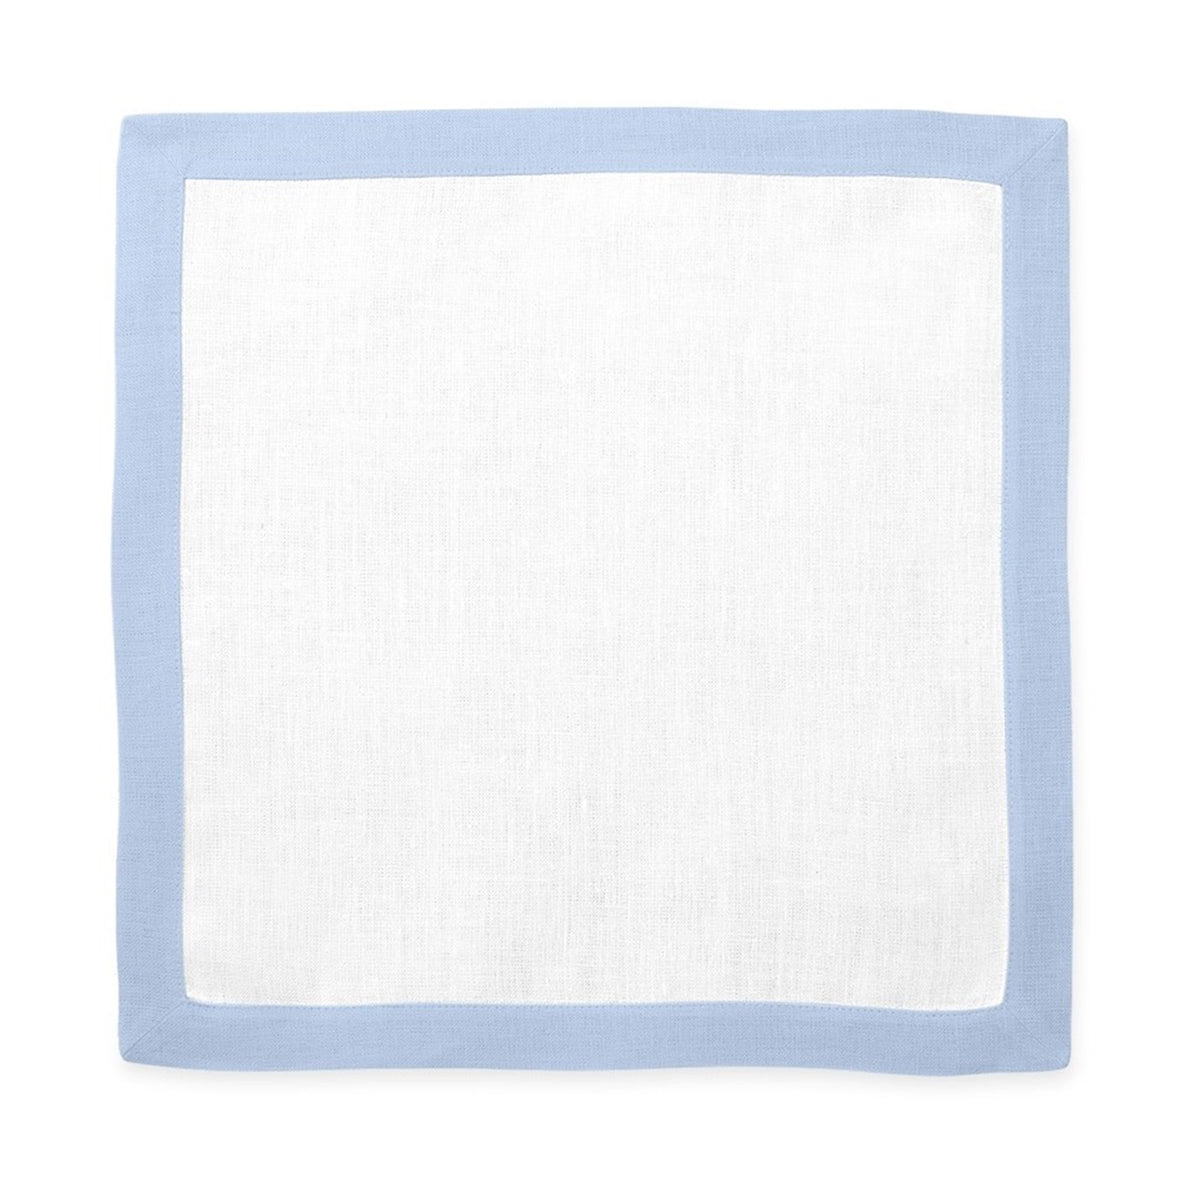 Silo Image of Matouk Border Placemat in Color Ice Blue